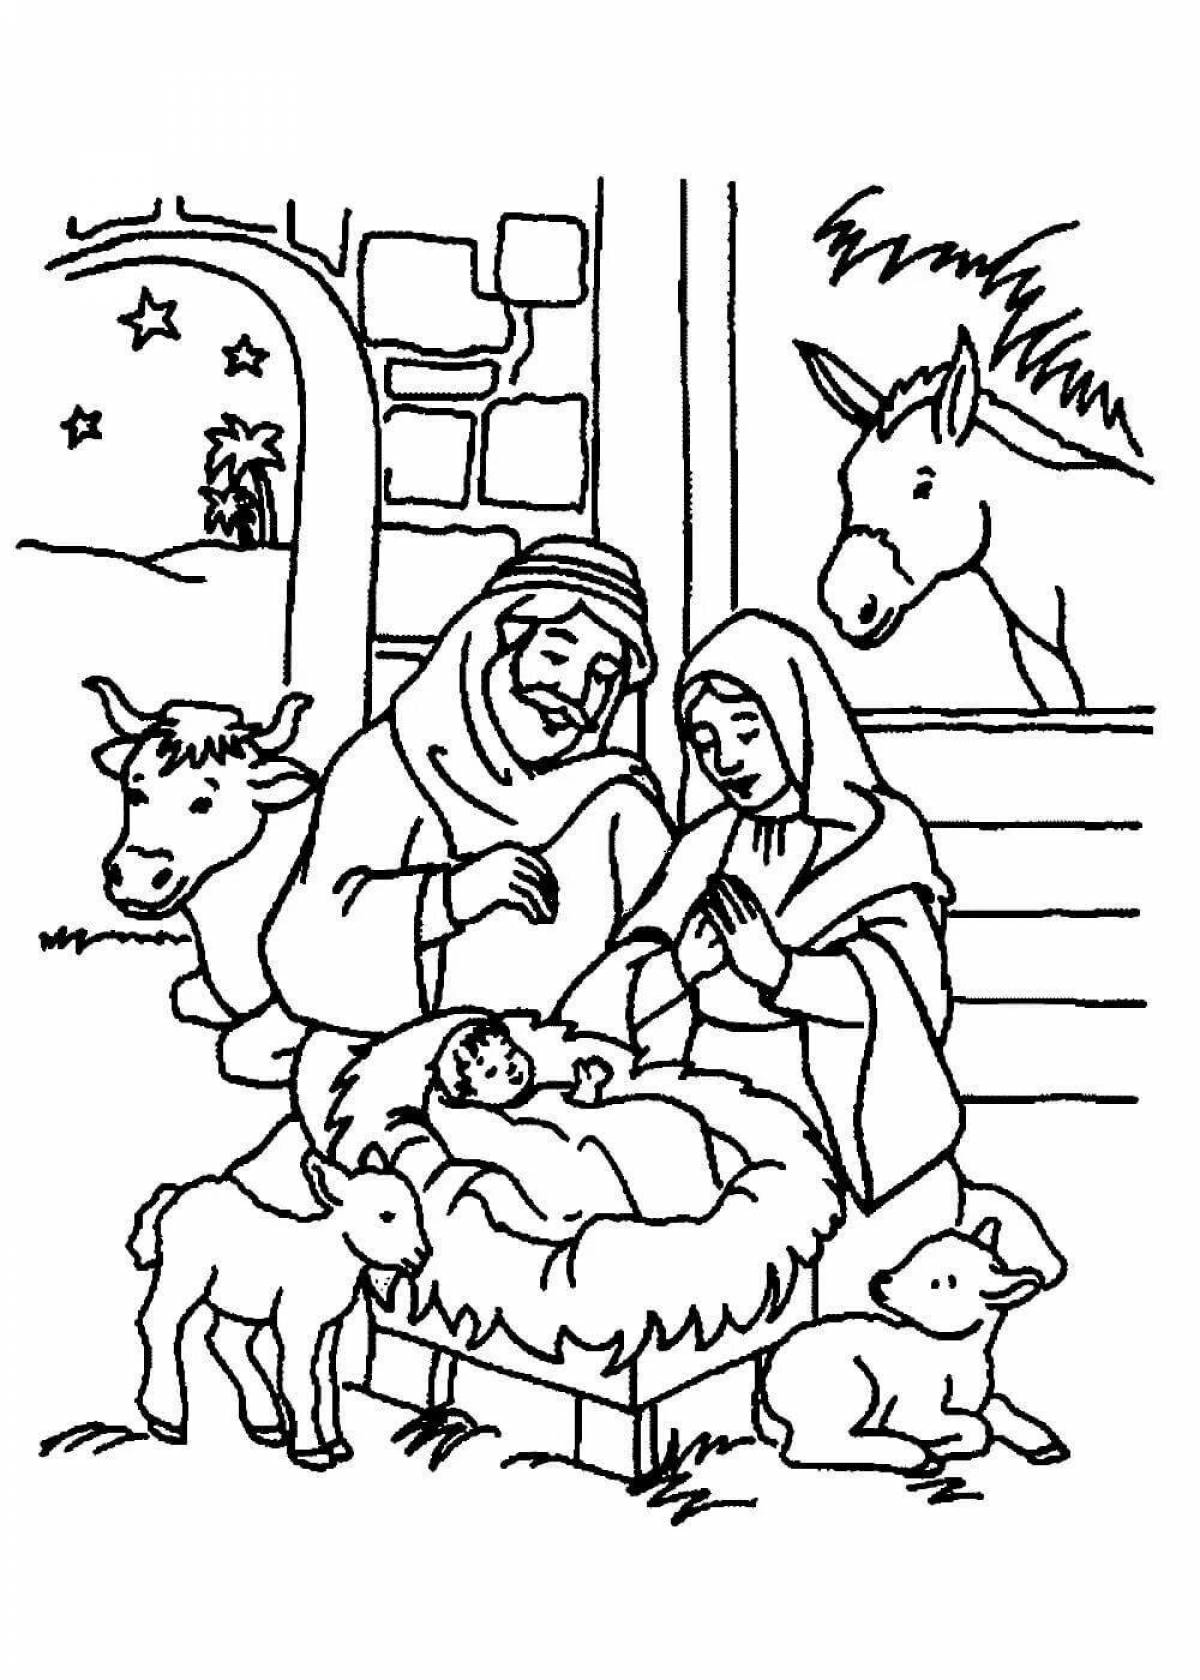 Adorable Christmas coloring book for 3-4 year olds